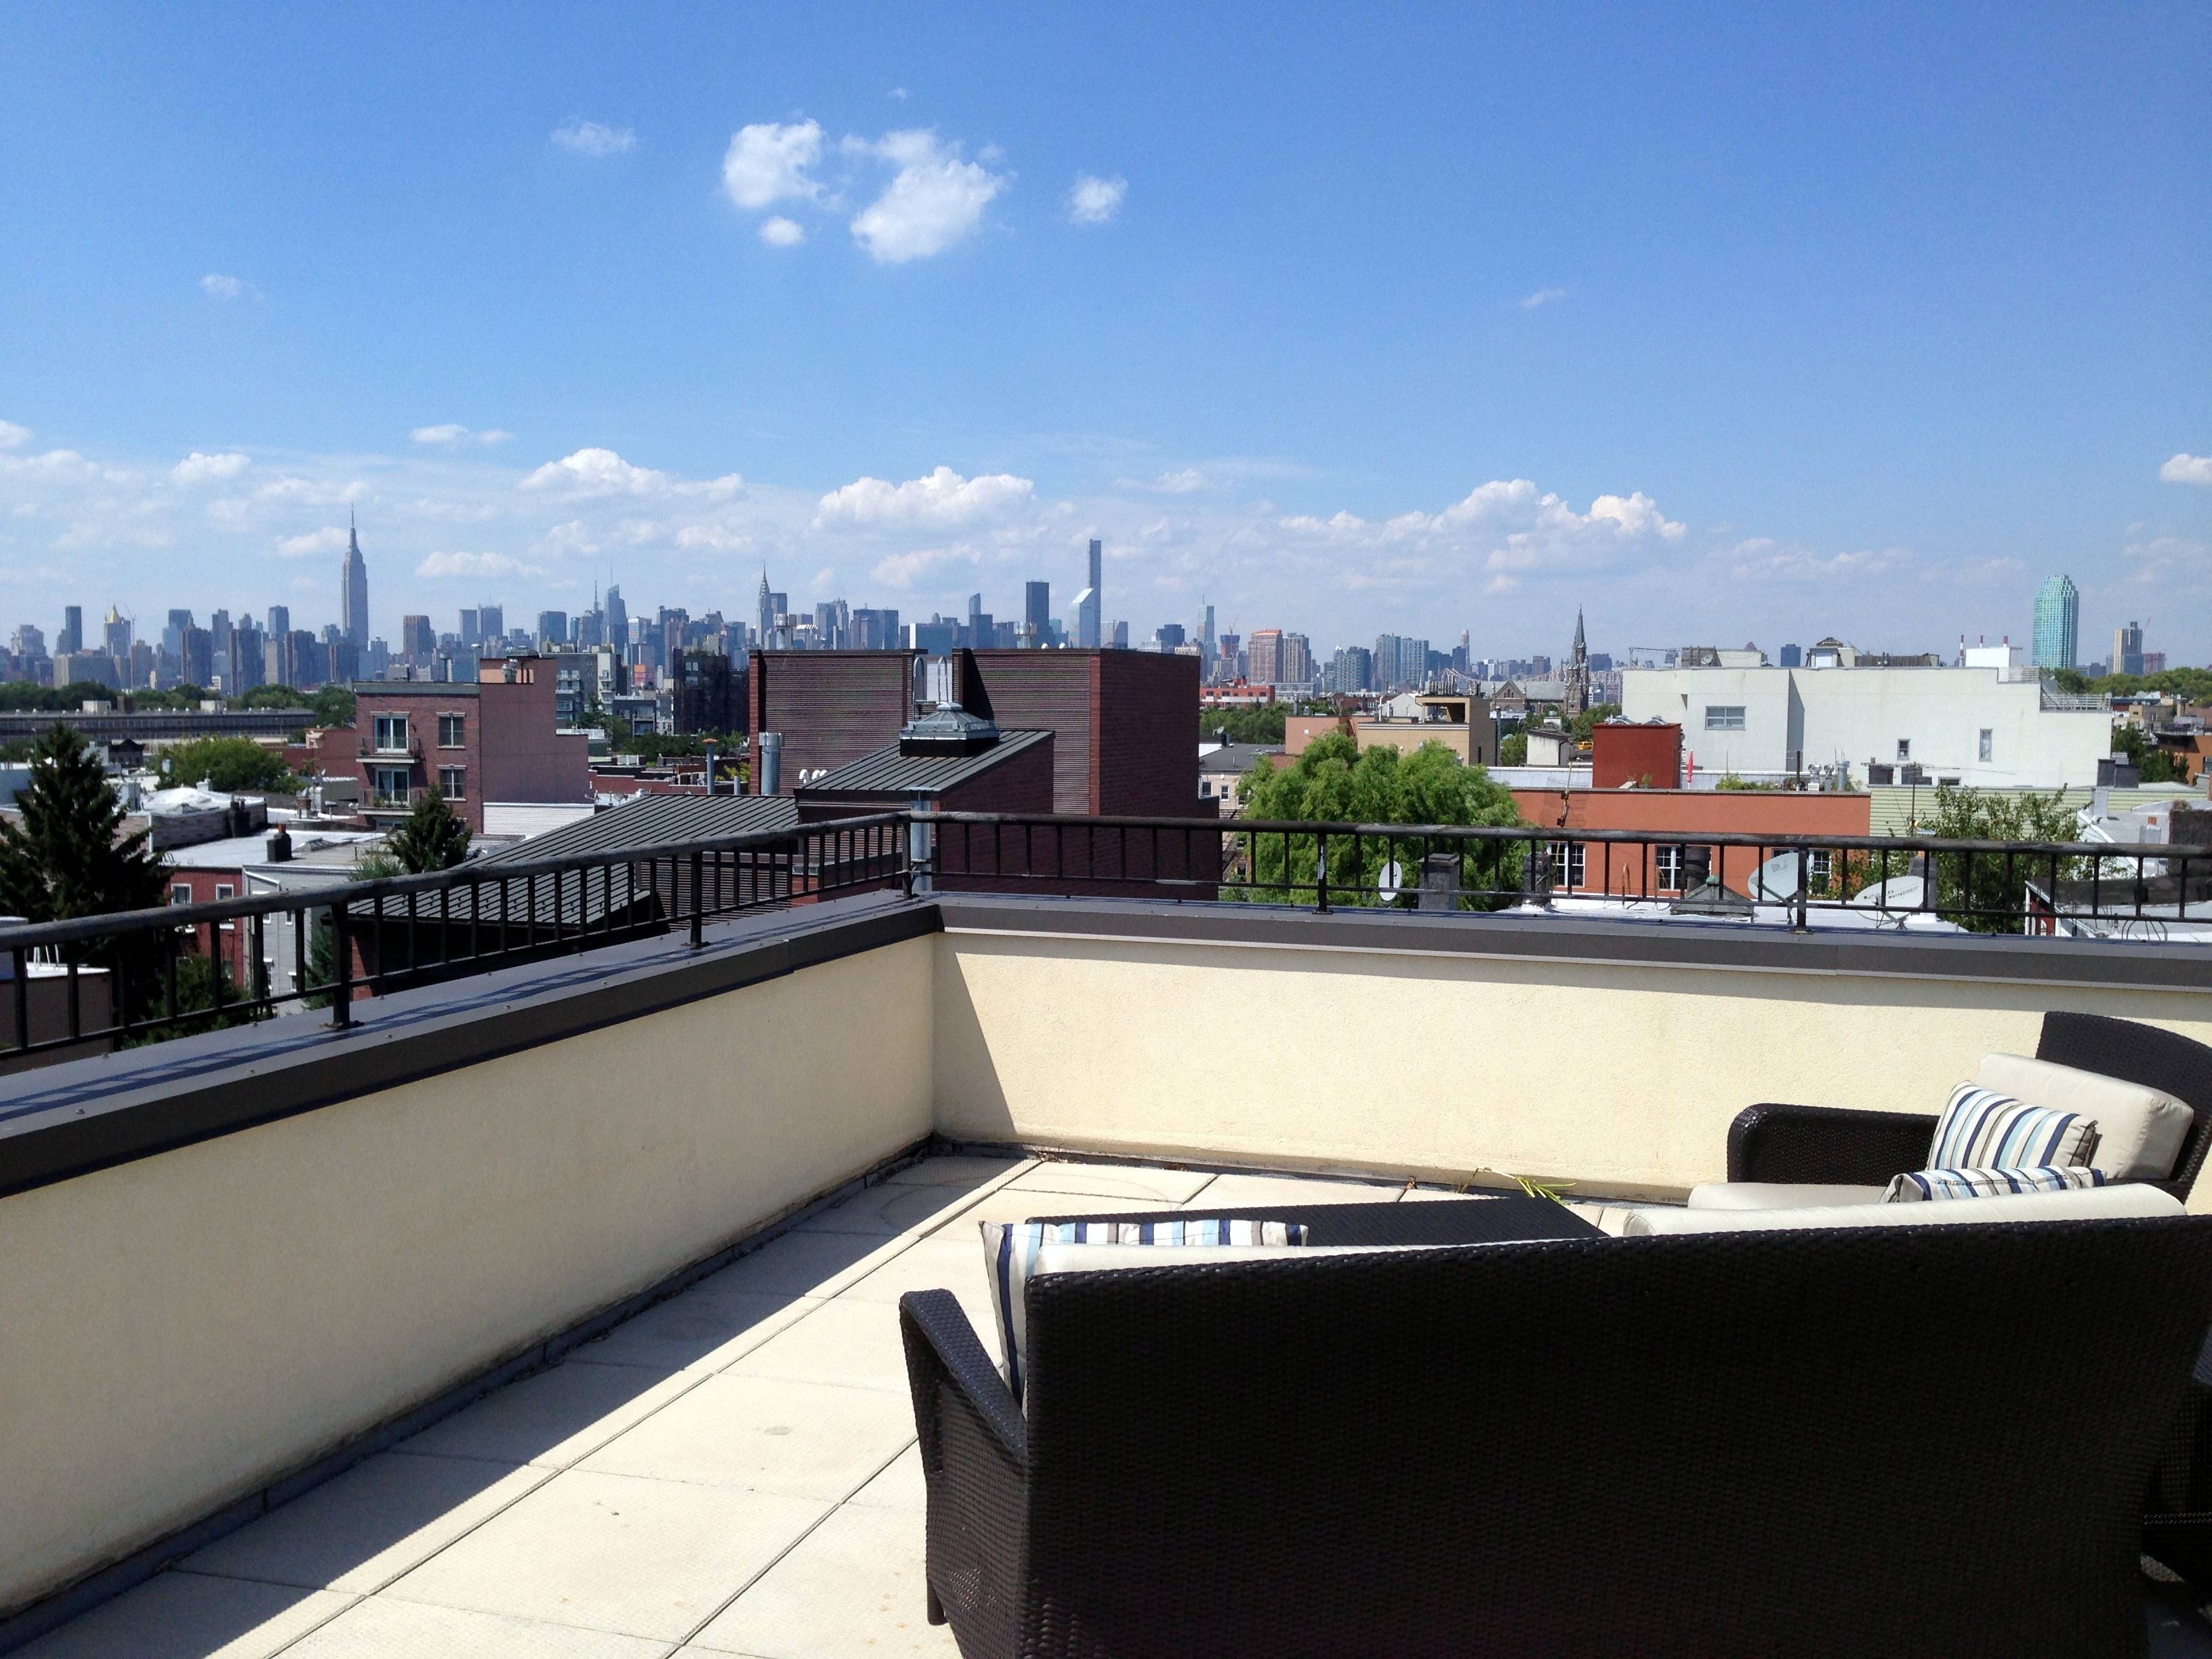 Private Roof Terrace Penthouse DUPLEX. 2 Beds 2 Baths + Home Office or 3rd Bedroom. 4 Private Balconies, 2 Private Terraces with Panoramic Views.